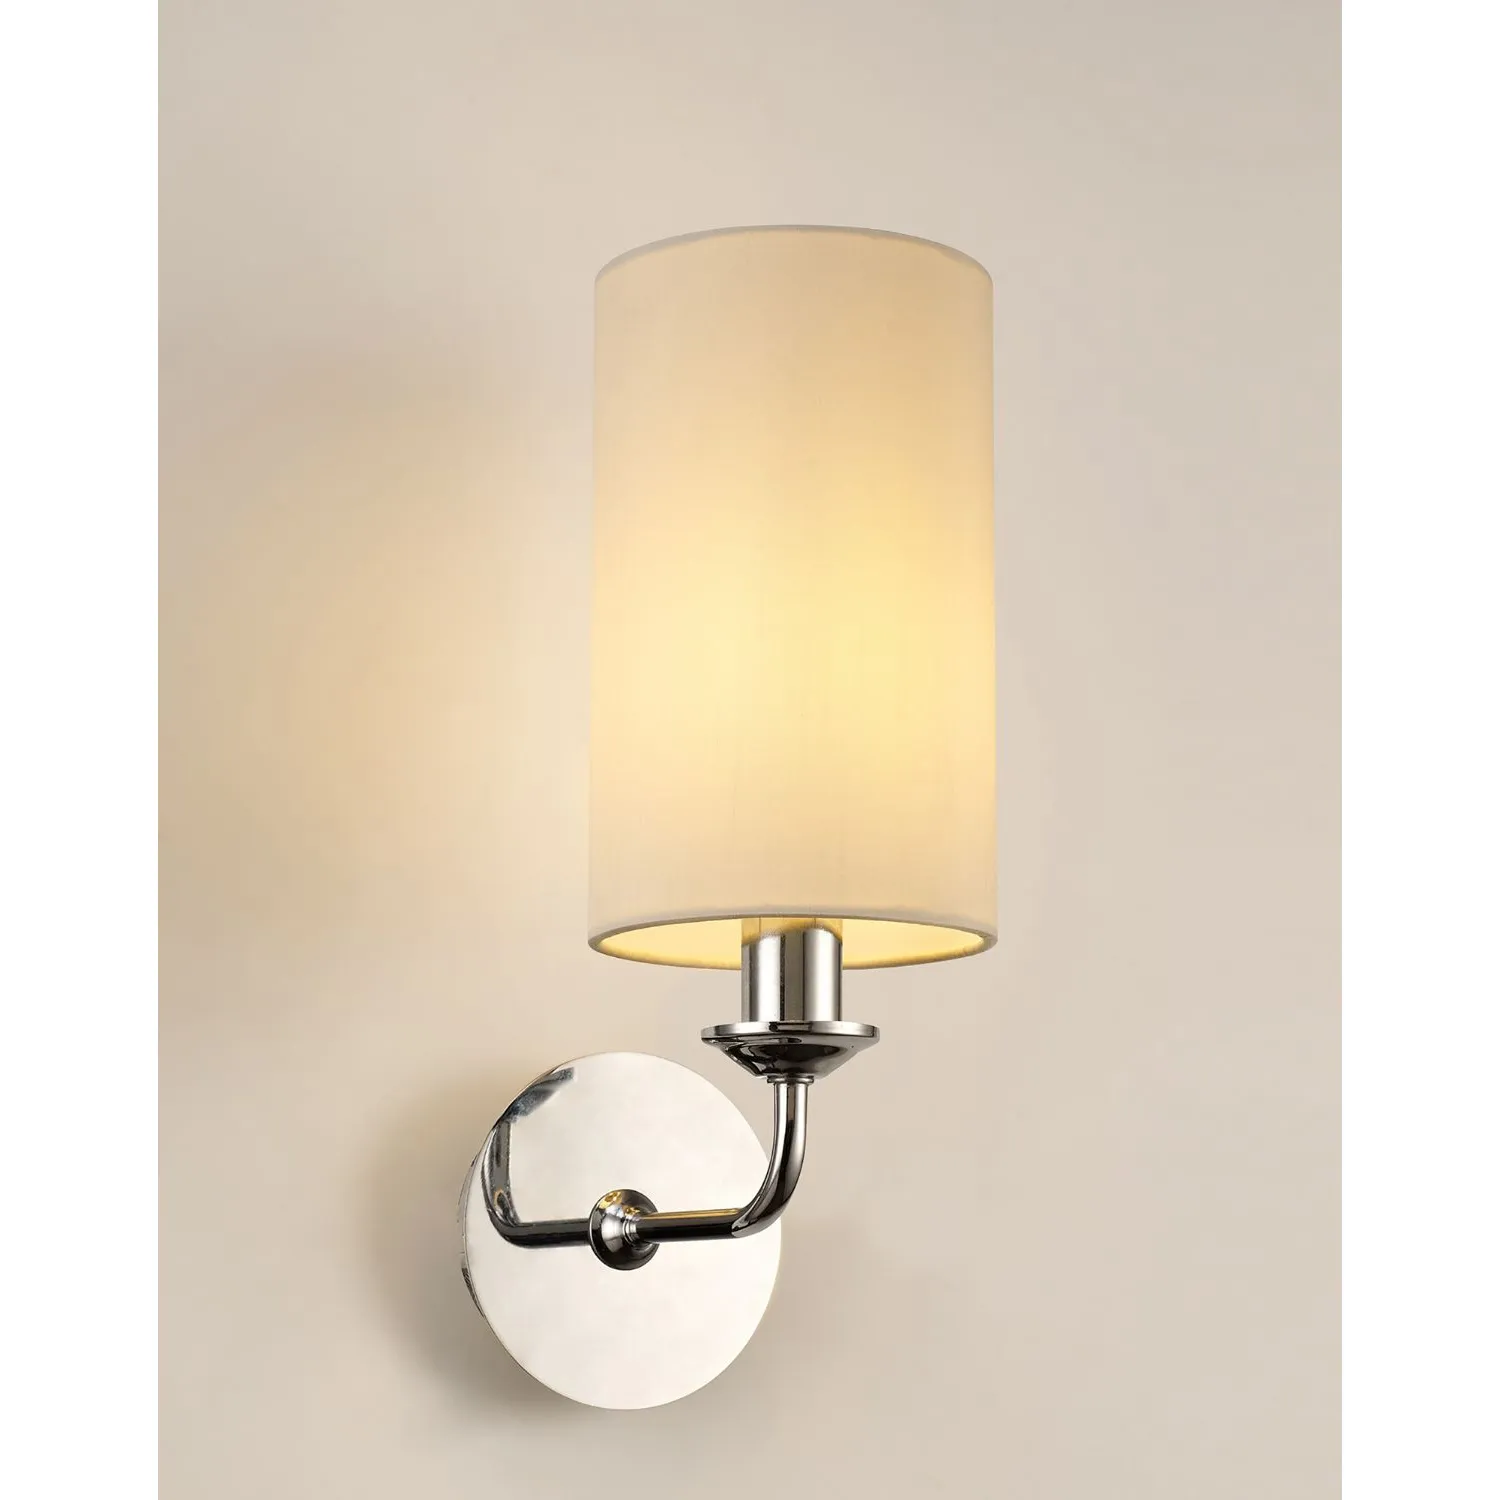 Banyan 1 Light Switched Wall Lamp, E14 Polished Chrome c w 120mm Faux Silk Shade, Ivory Pearl White Laminate